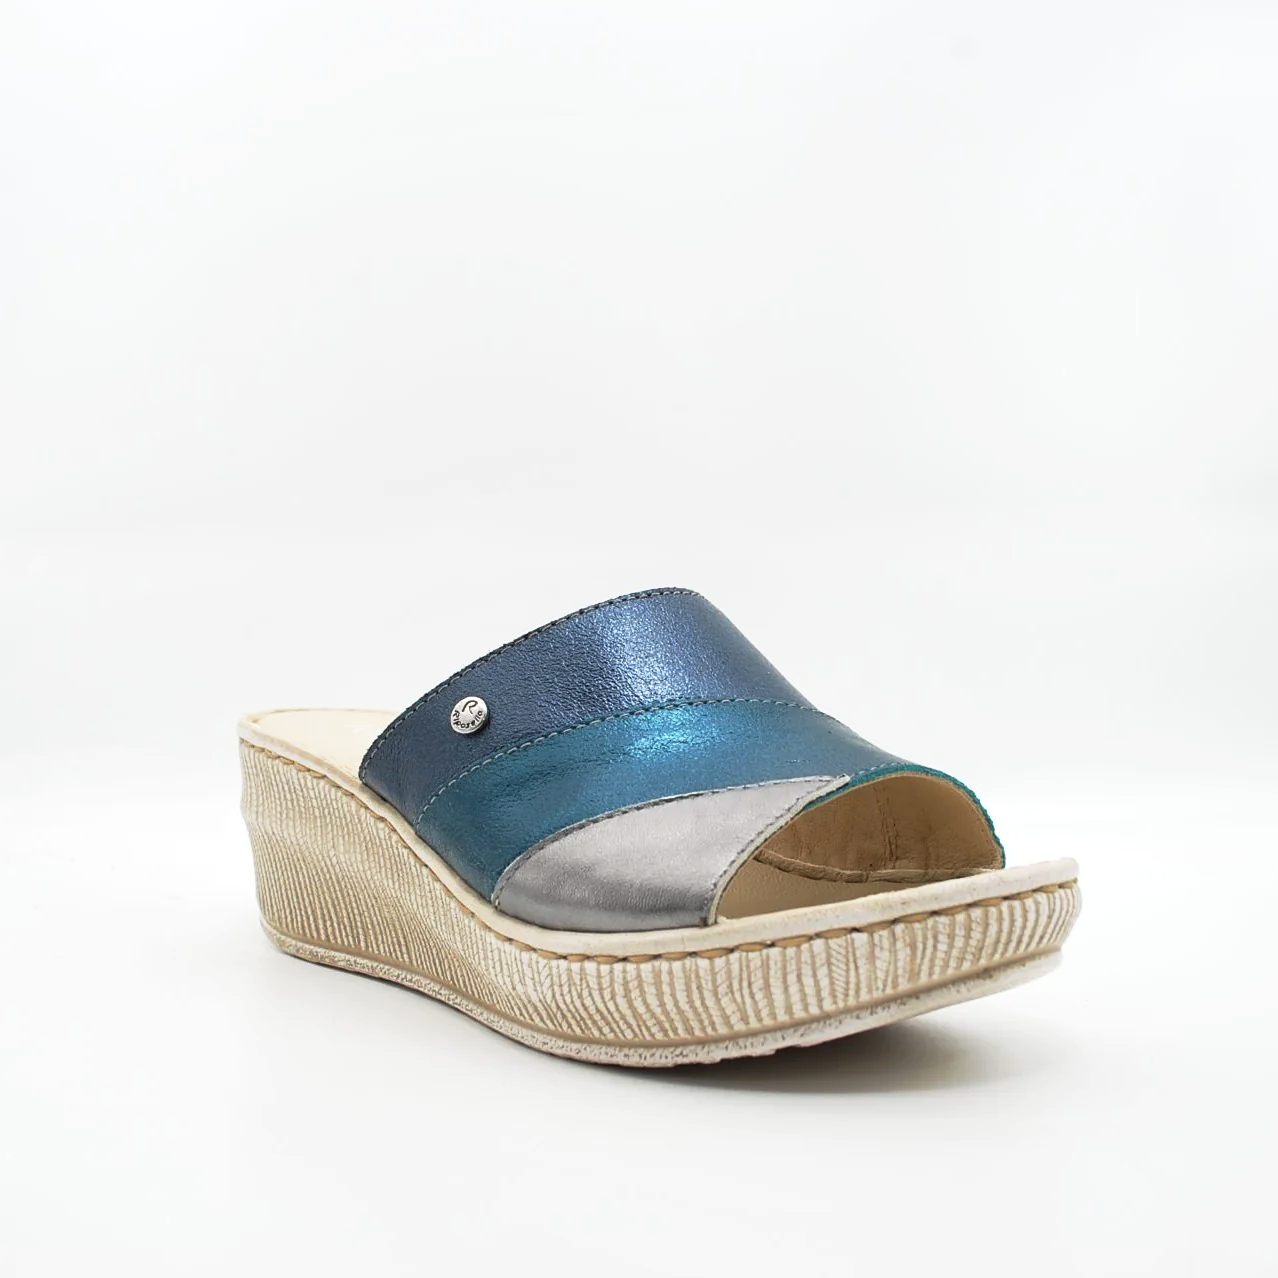 zeppa-riposella-in-pelle-comfort-2_32bbae4f-c3f0-4994-81ab-6d239a98c73a.png